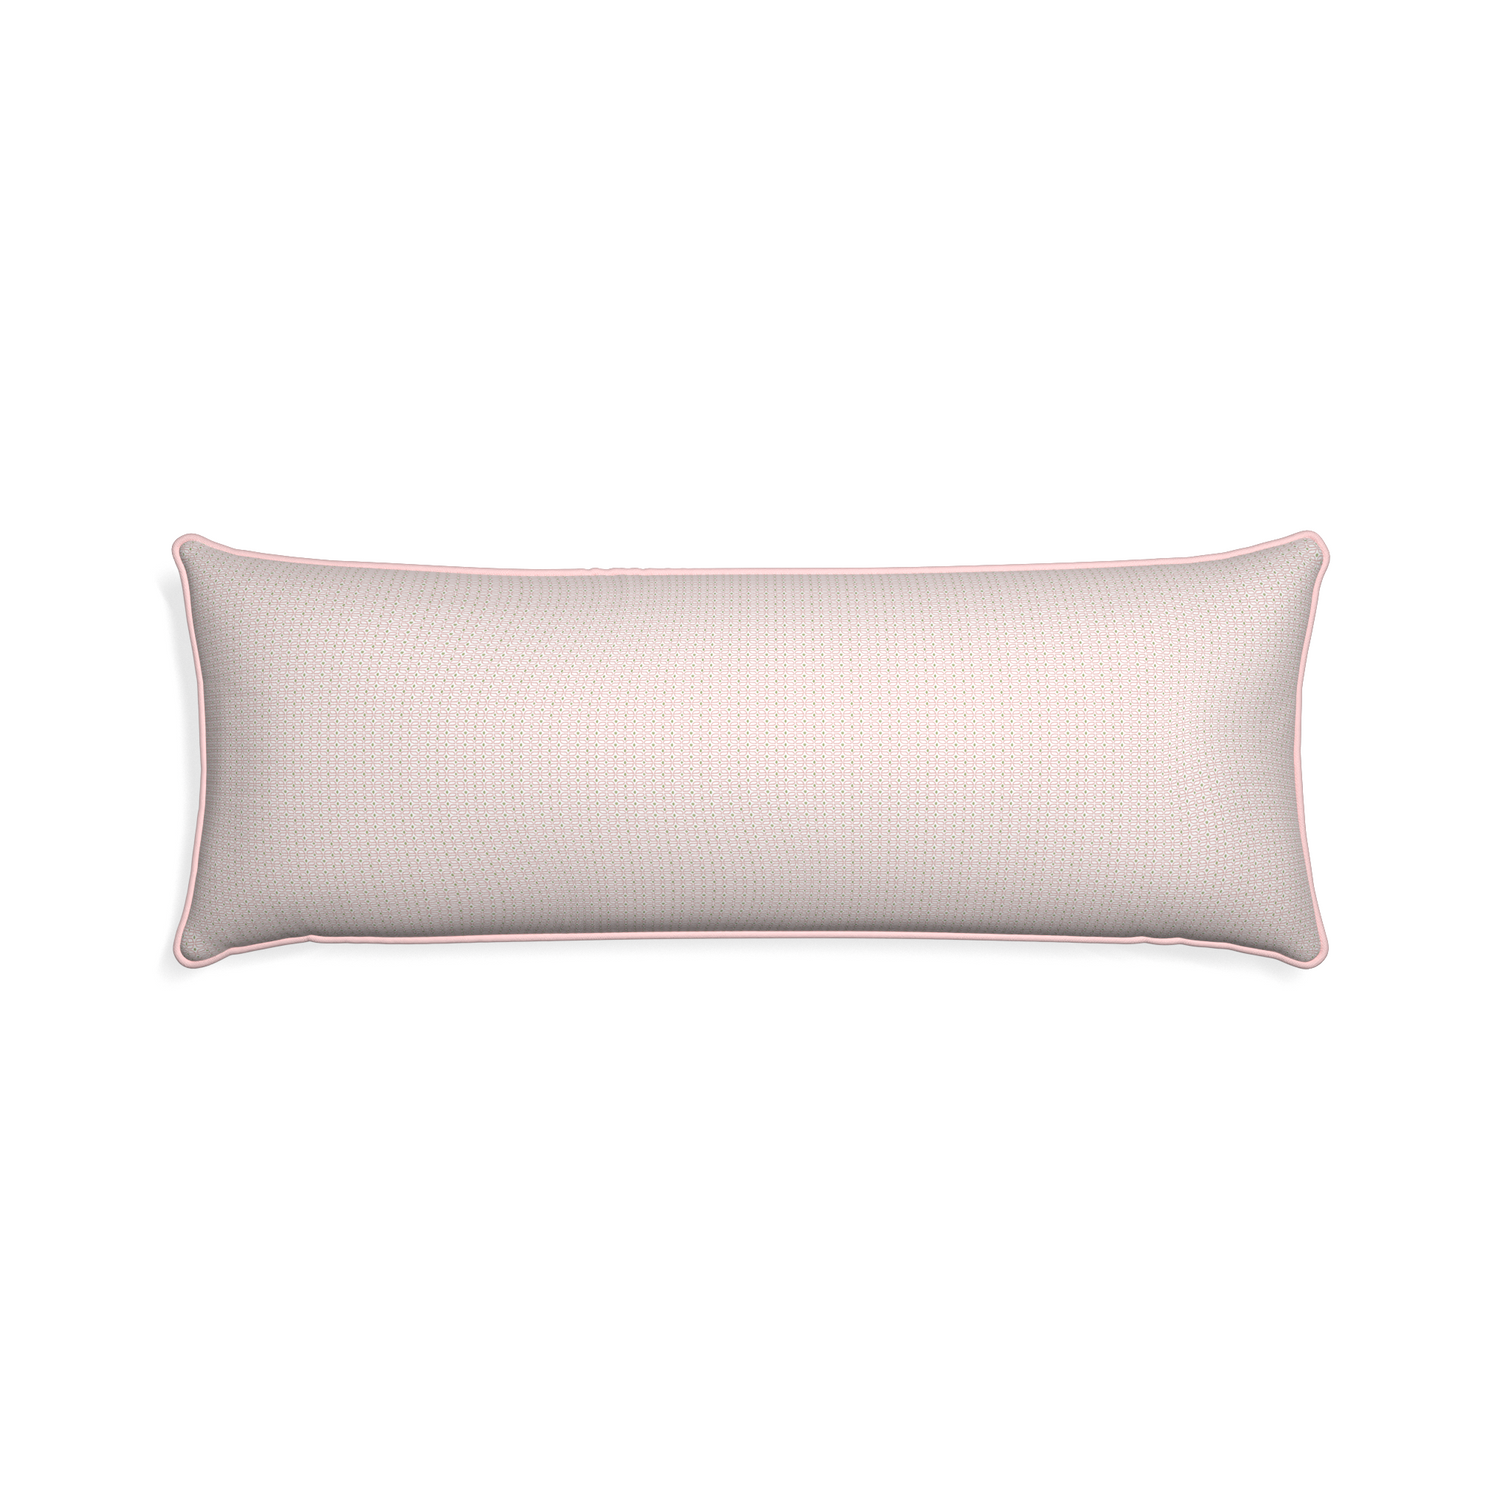 Xl-lumbar loomi pink custom pink geometricpillow with petal piping on white background